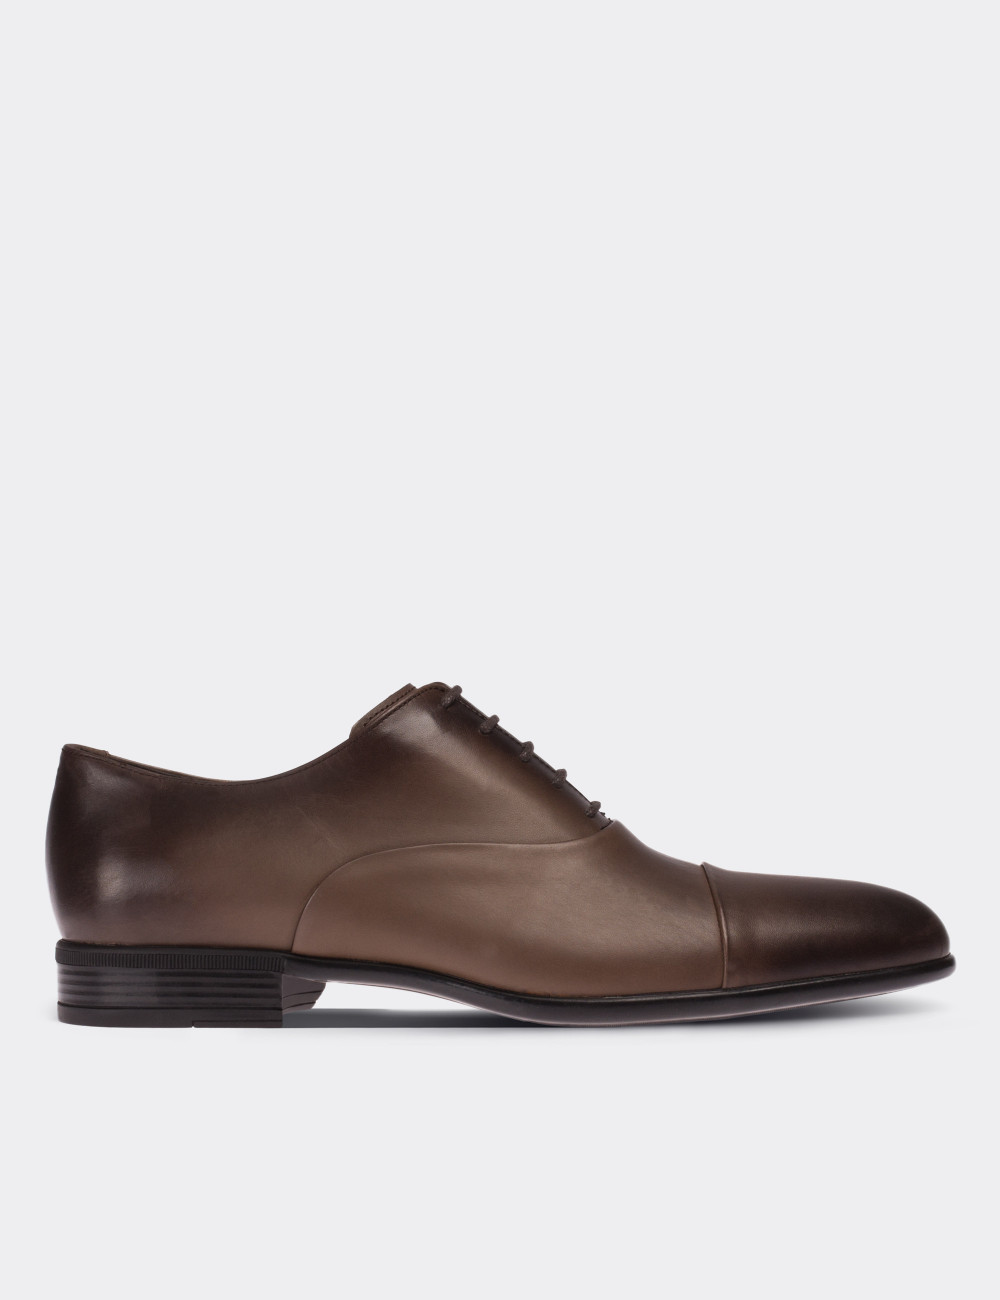 Sandstone  Leather Classic Shoes - 01026MVZNC01